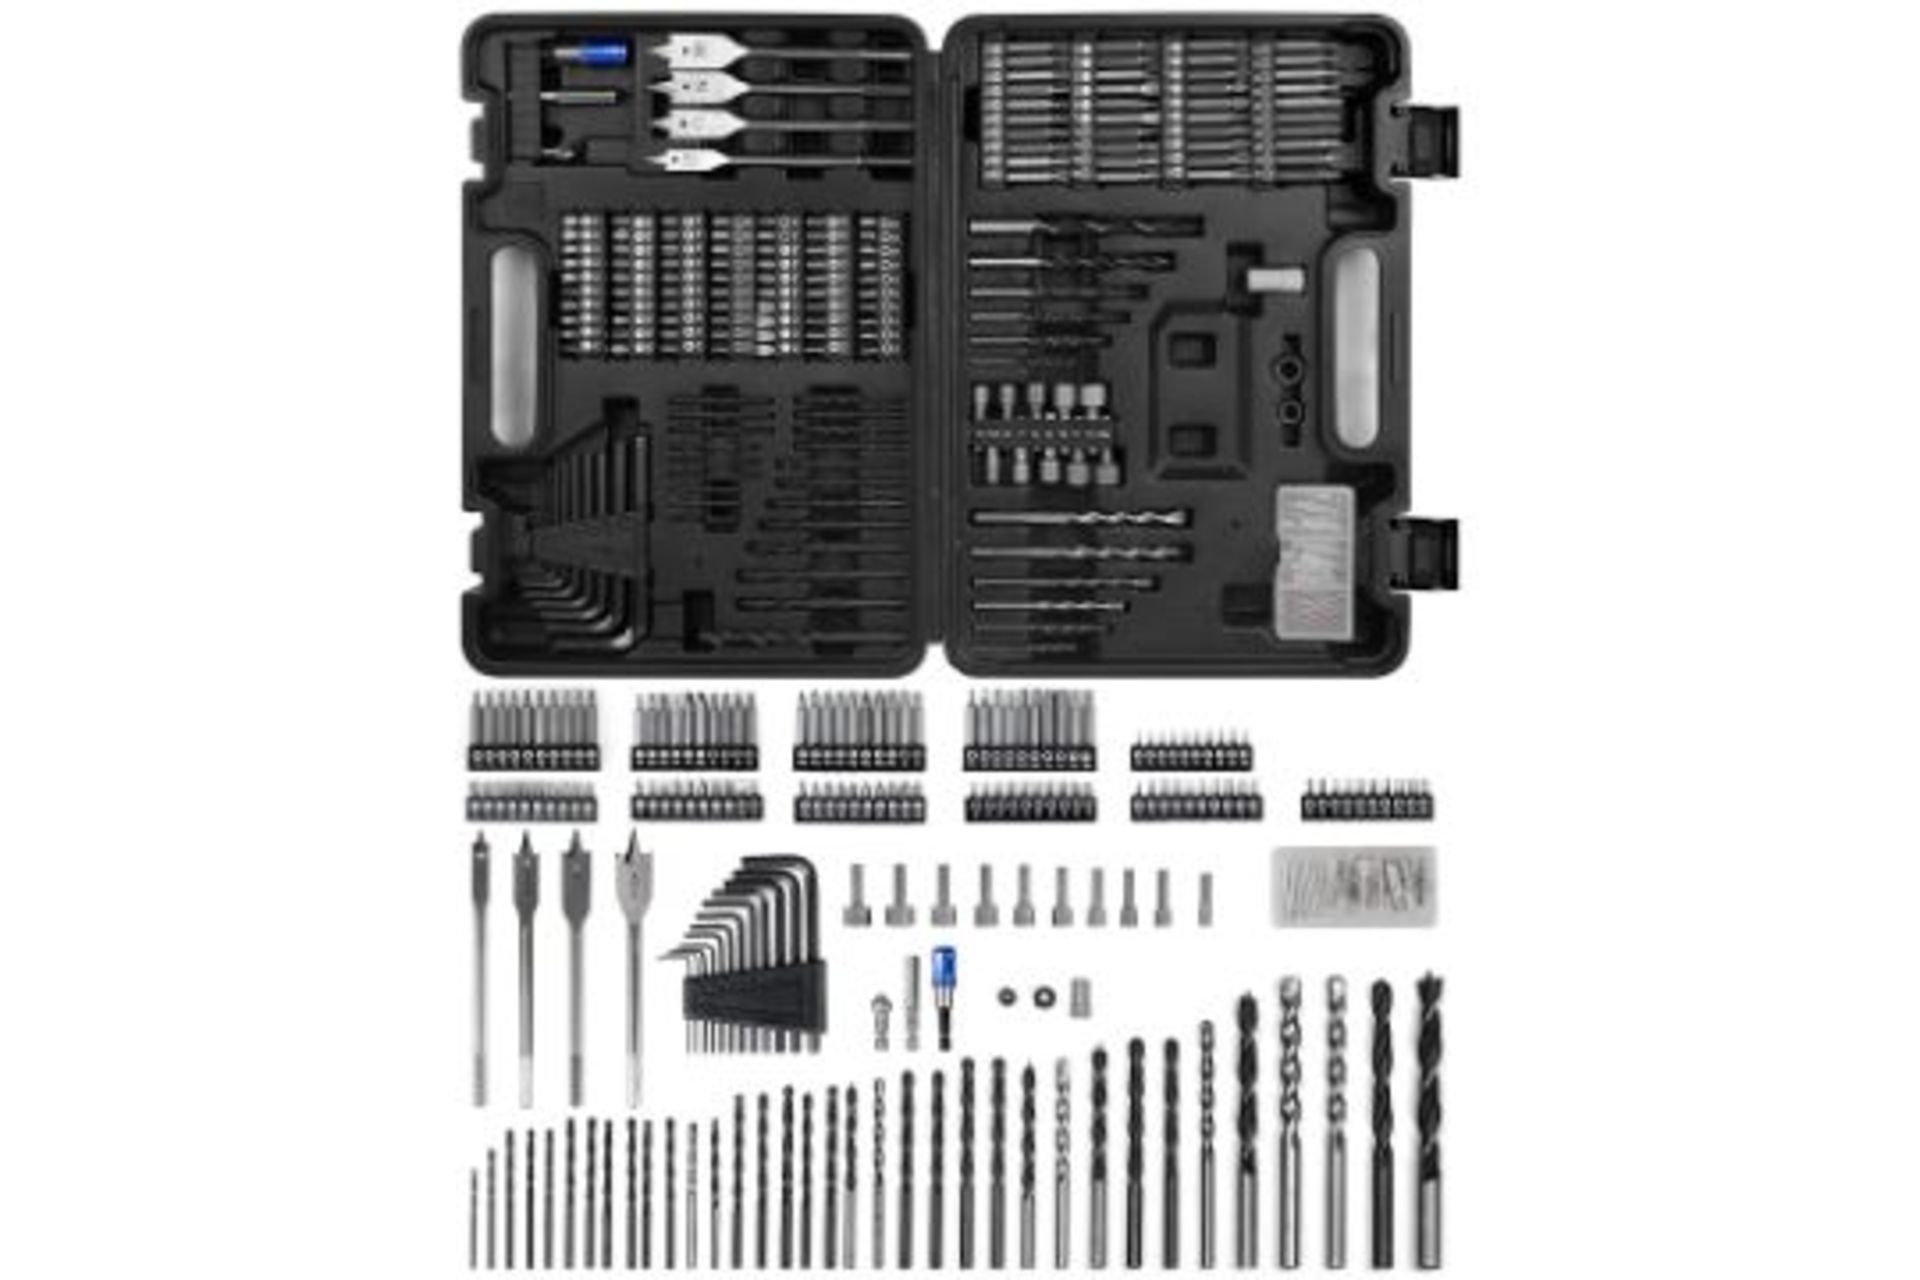 PALLET TO CONTAIN 30 X NEW BOXED WESCO Drill Bit Set, 199Pcs Combination Drill Bit Sets Includes HSS